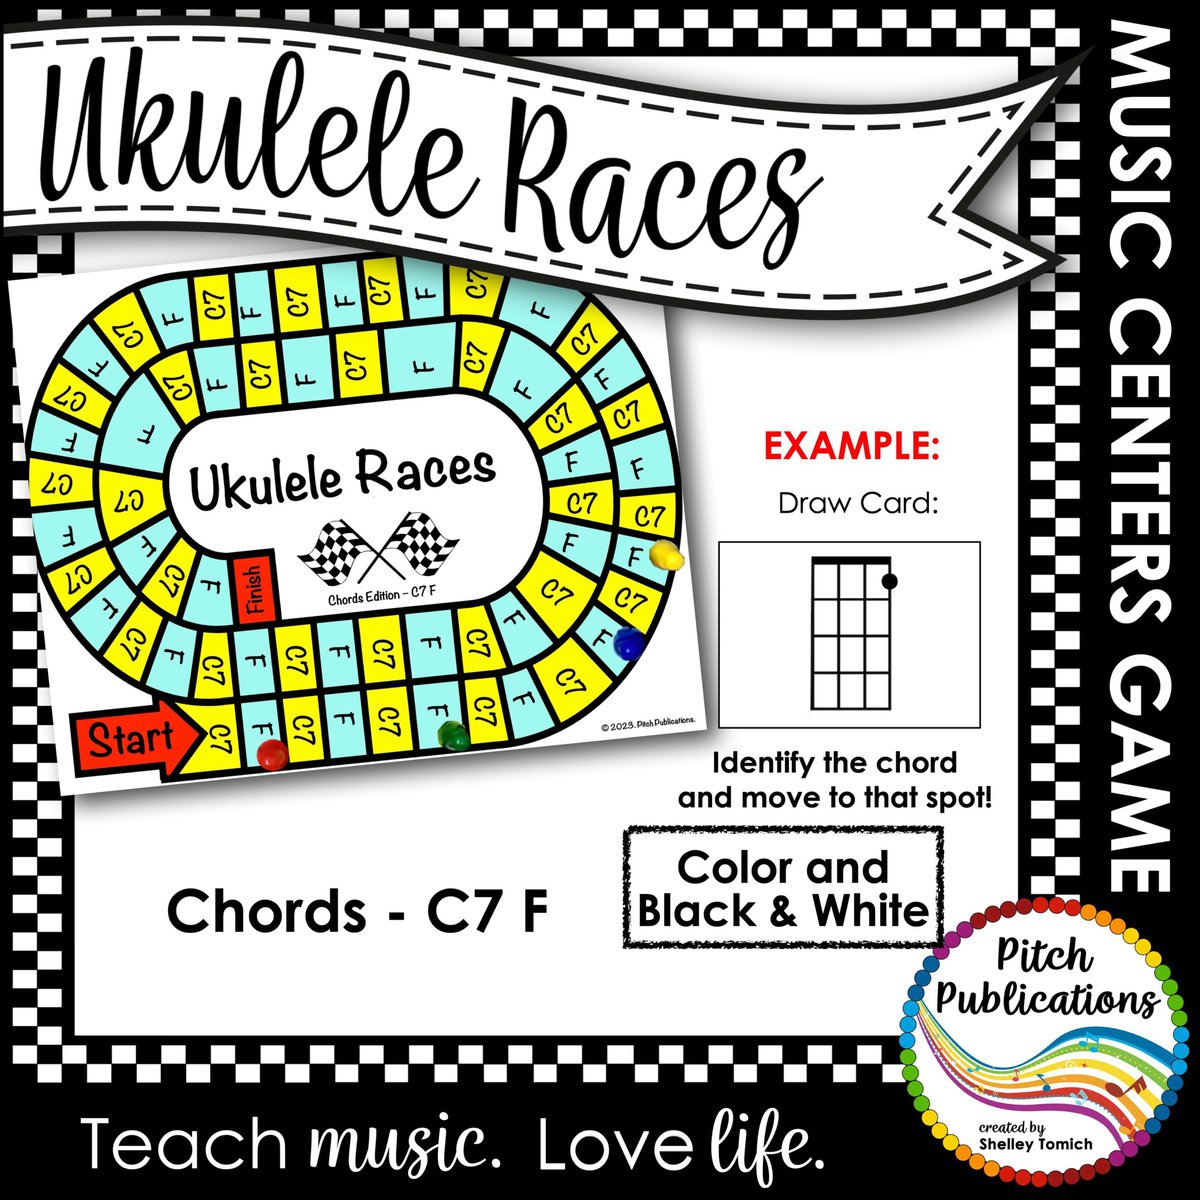 The words Ukulele Races in a banner. Underneath is a game board and chord card sample. Chords include C7, and F